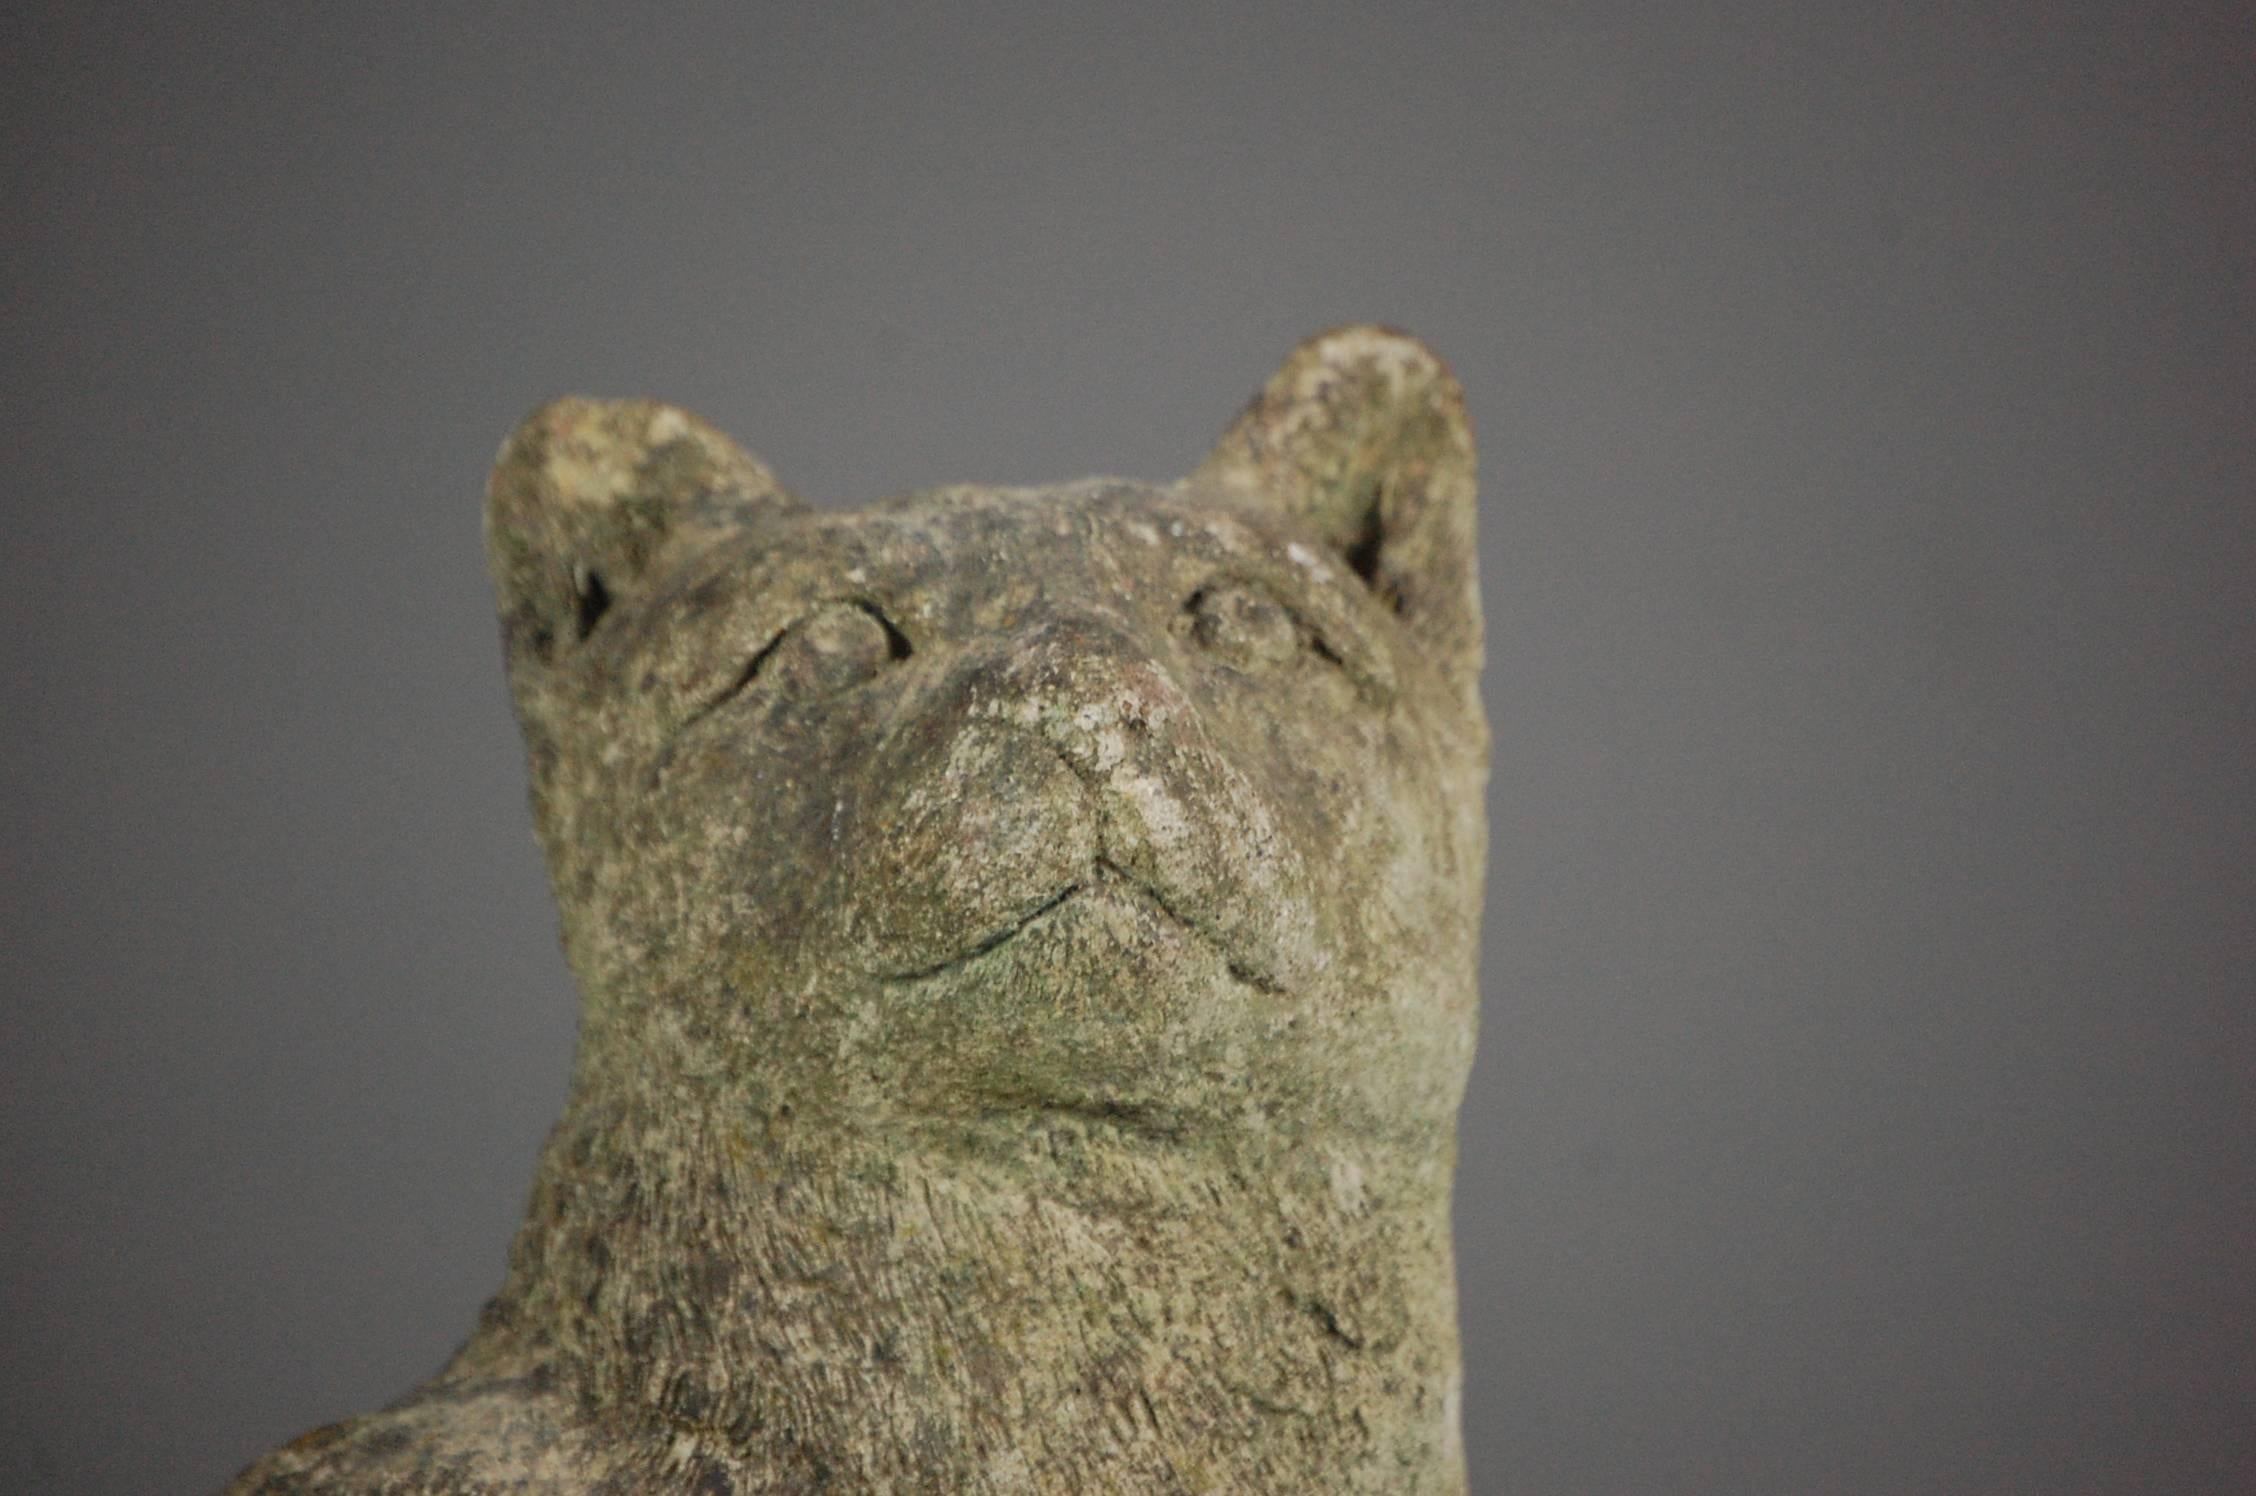 Reconstitute stone pussy cat, well weathered, life-size. English, circa 1950.